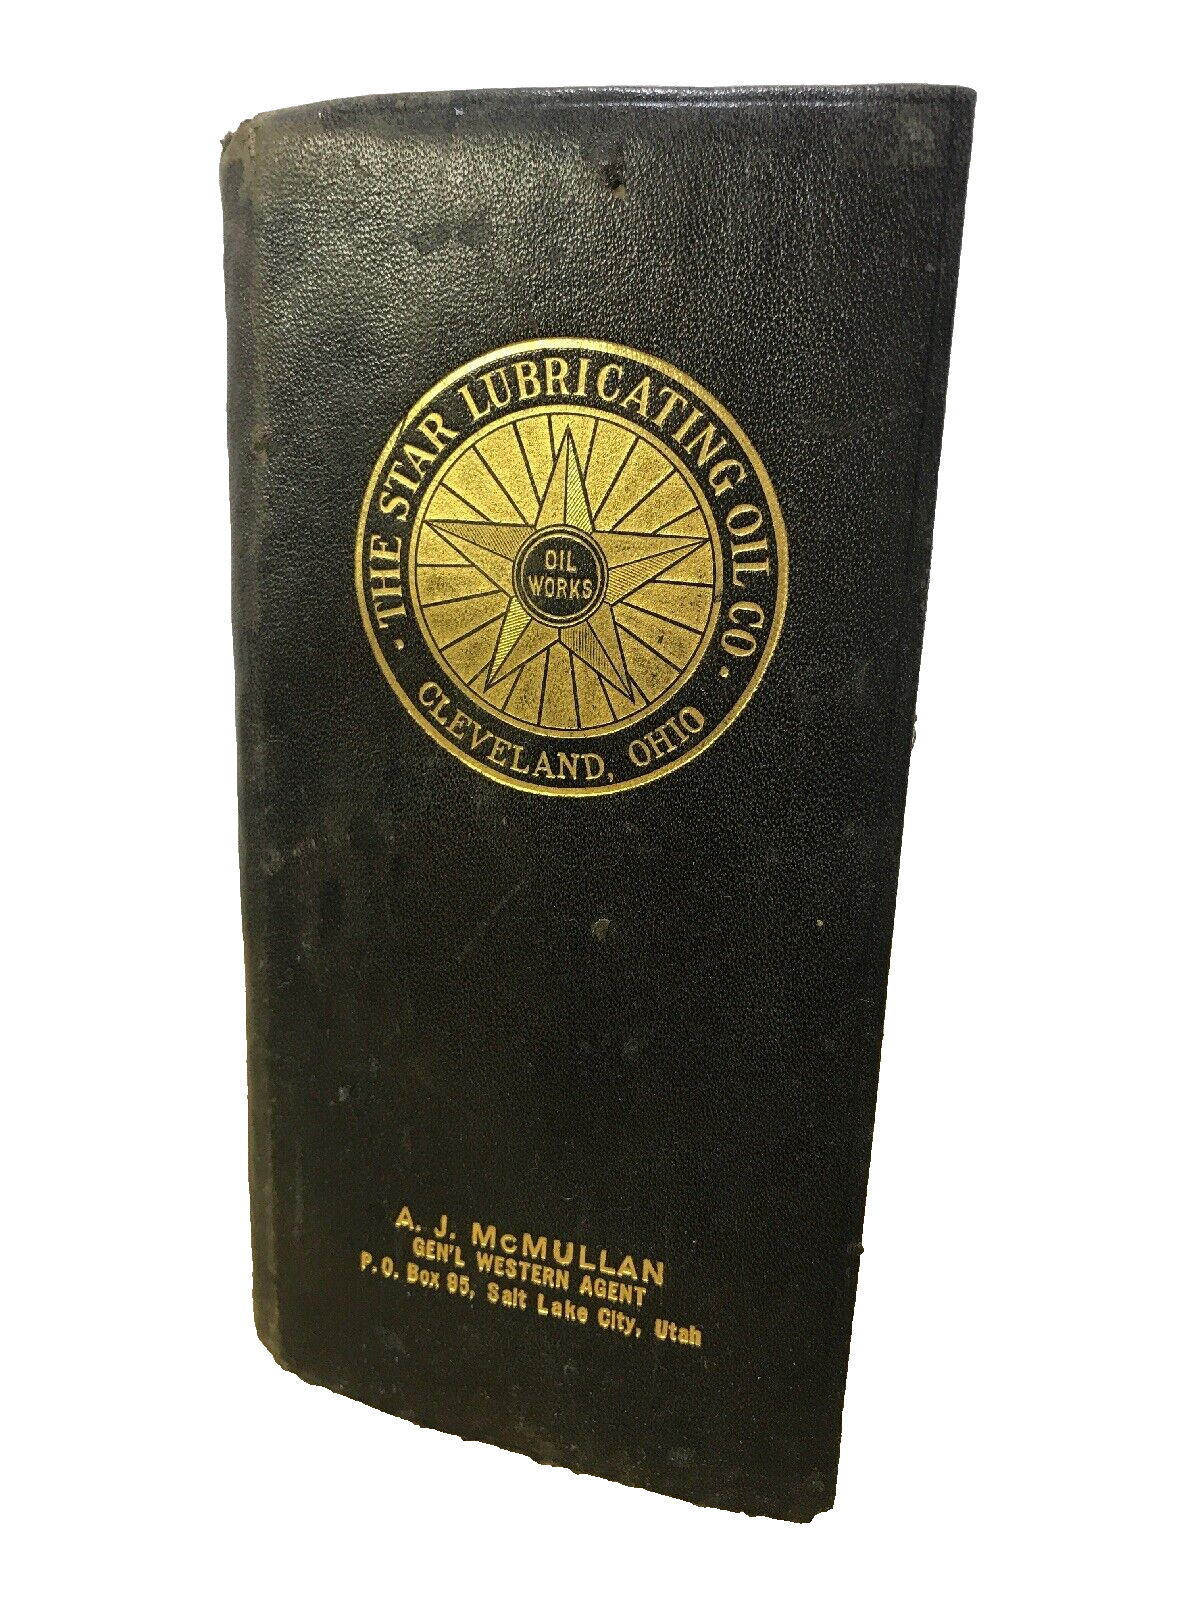 The STAR LUBRICATING OIL 1913 Western Agent Calender Memo Leather Trifold Book